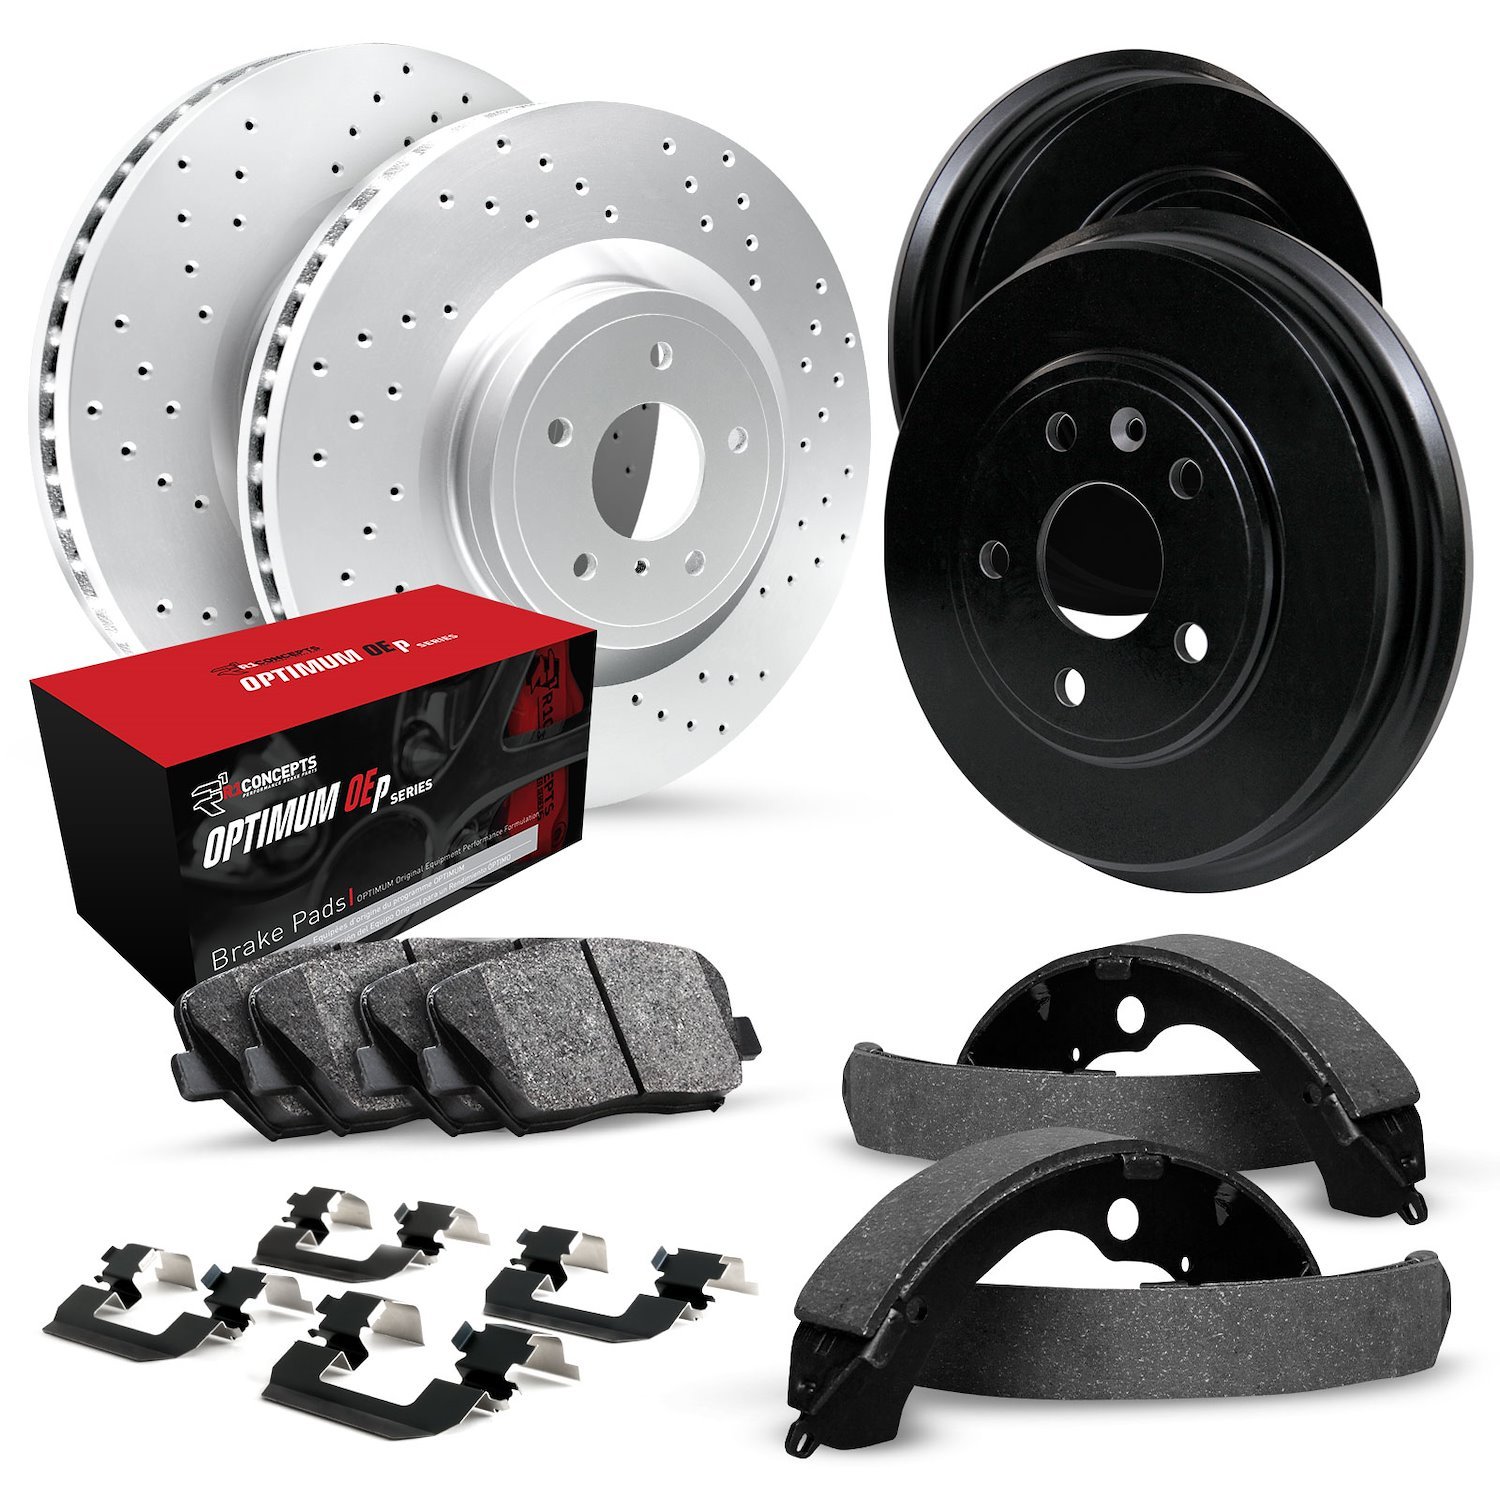 GEO-Carbon Drilled Brake Rotor & Drum Set w/Optimum OE Pads, Shoes, & Hardware, 1985-1986 GM, Position: Front & Rear